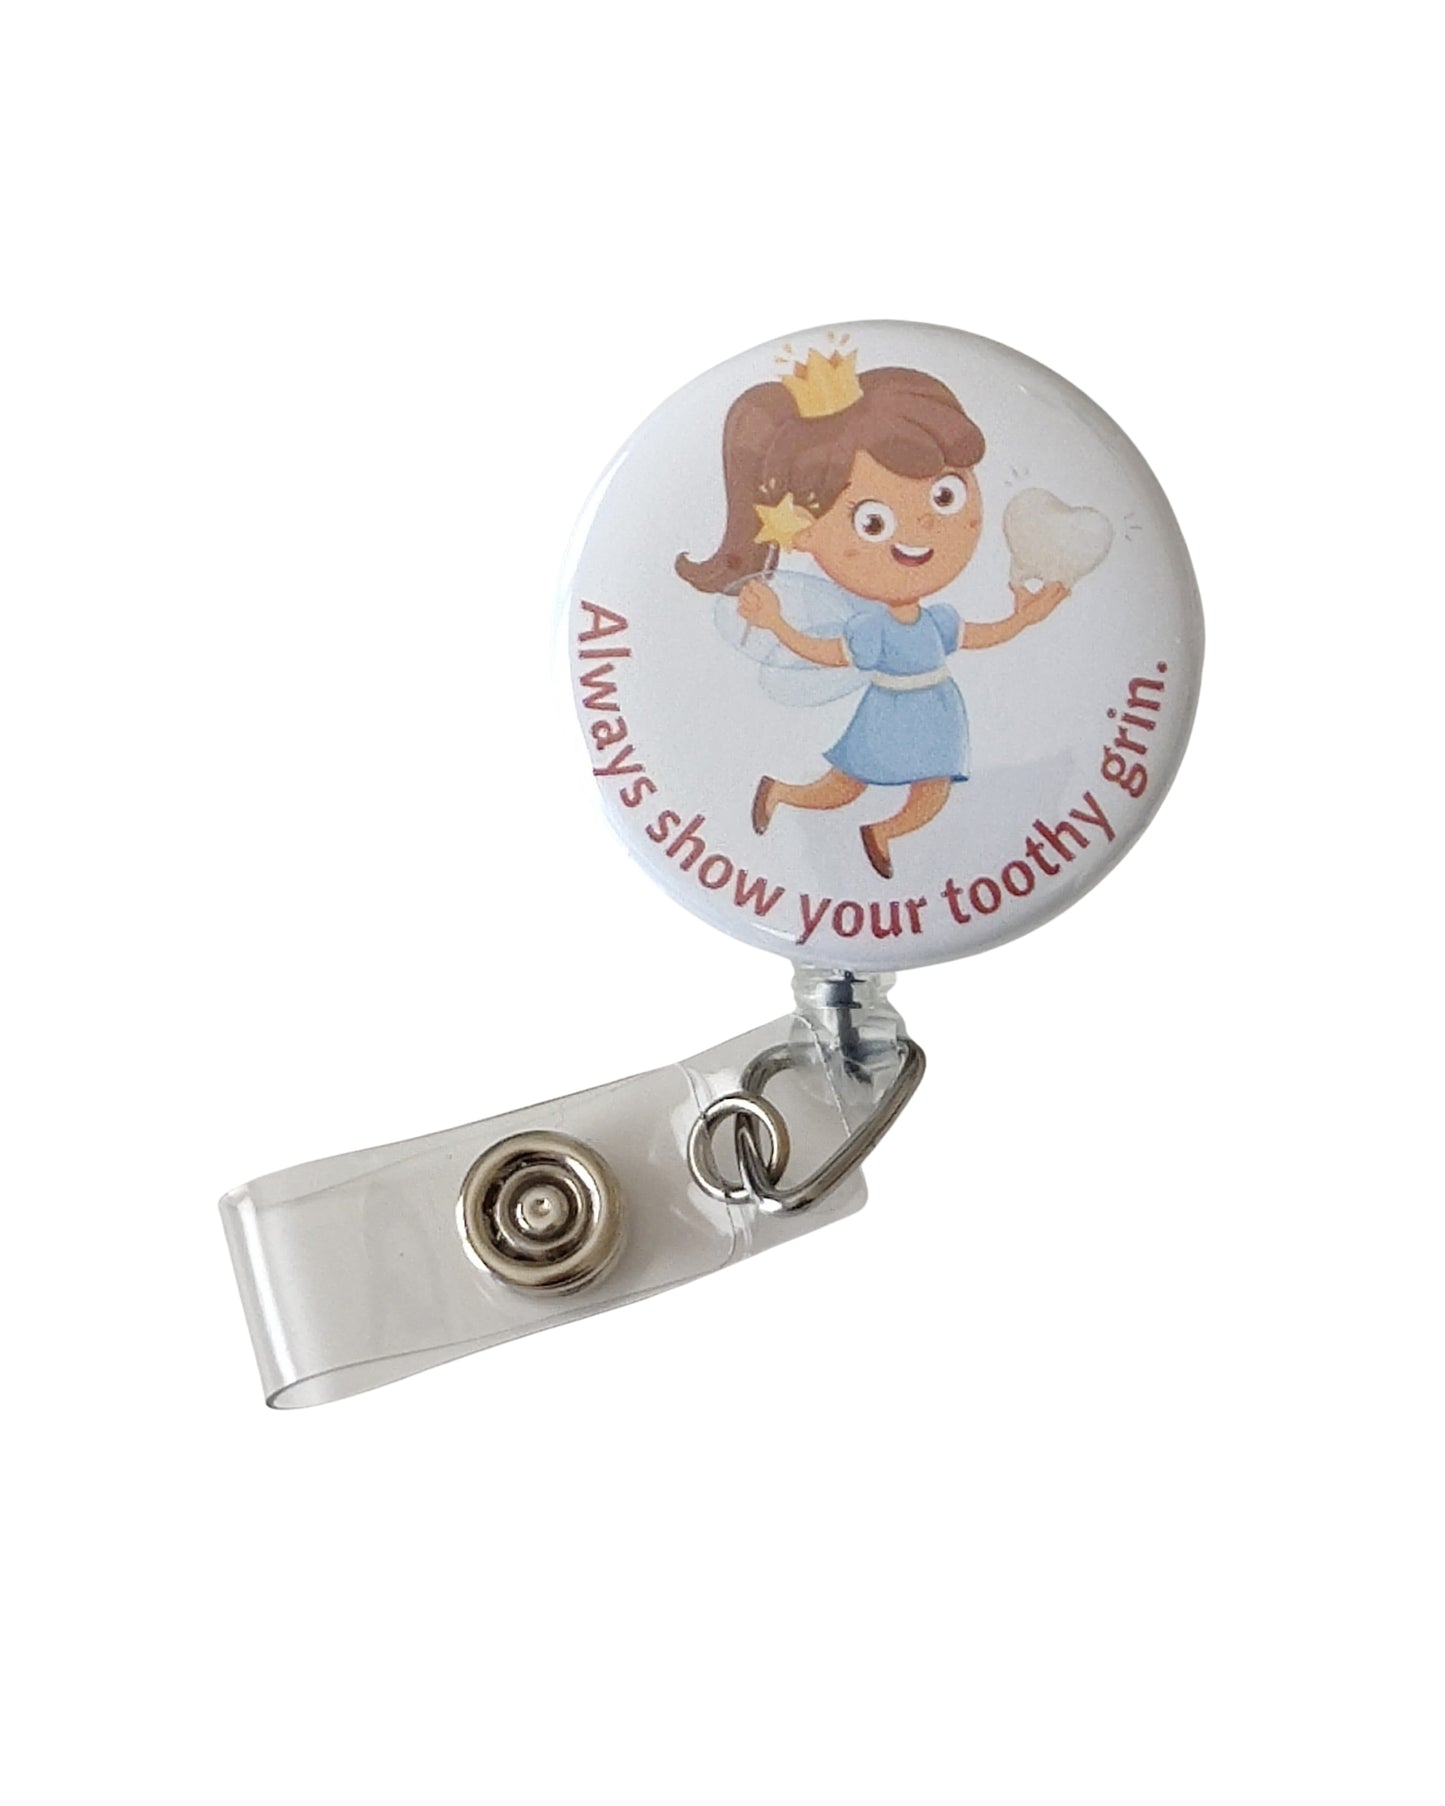 Retractable Badge Reel Bulldog Alligator Clip | Always Show Your Toothy Grin